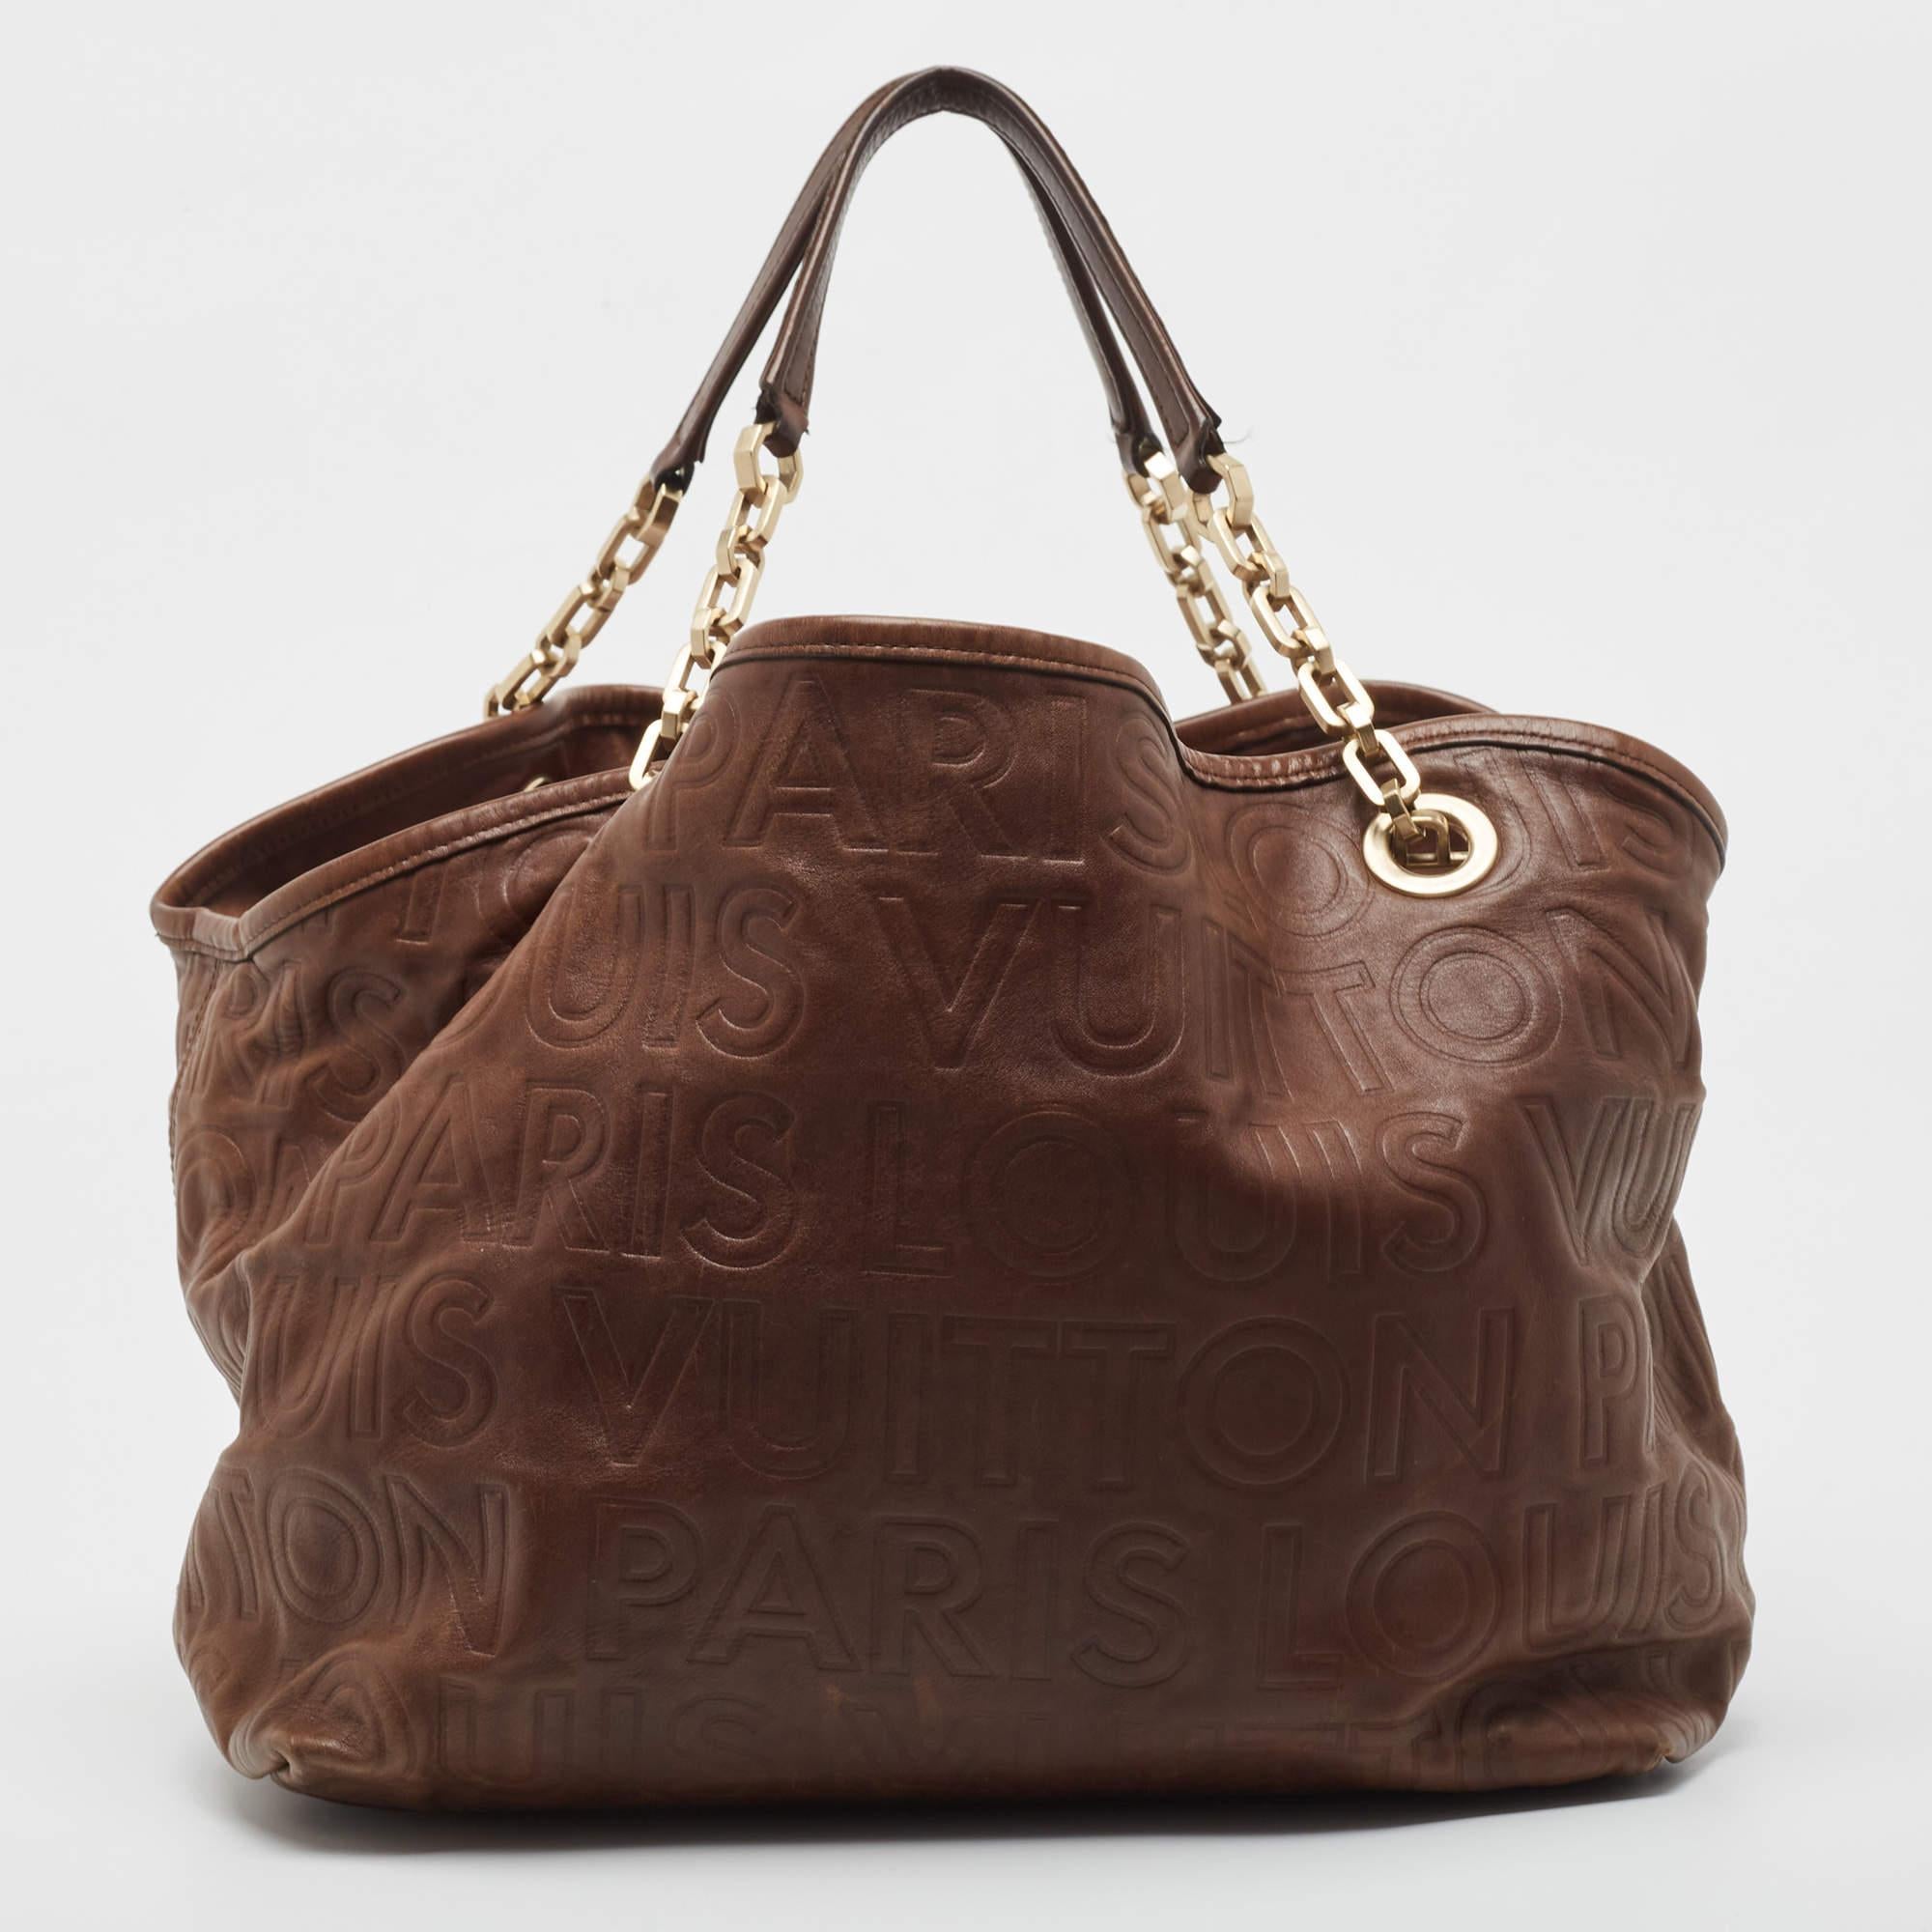 This Louis Vuitton bag is an example of the brand's fine designs that are skillfully crafted to project a classic charm. It is a functional creation with an elevating appeal.

Includes: Original Dustbag, Info Booklet, Brand Box